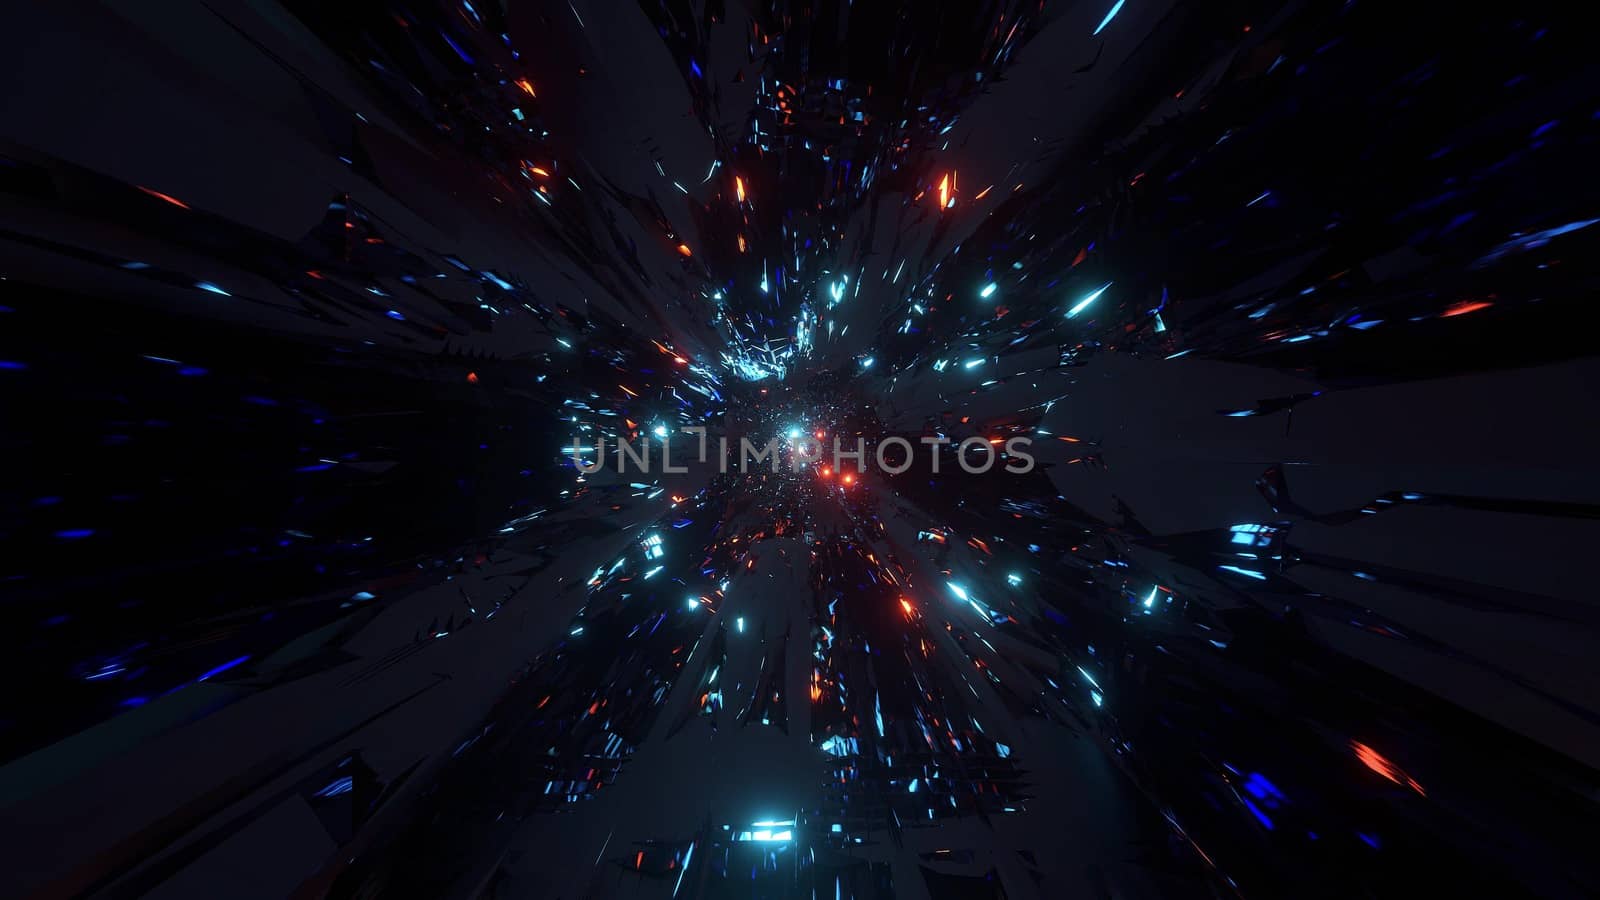 abstract space galaxy tunnel with glowing sphere planets 3d illustration design background wallpaper by tunnelmotions